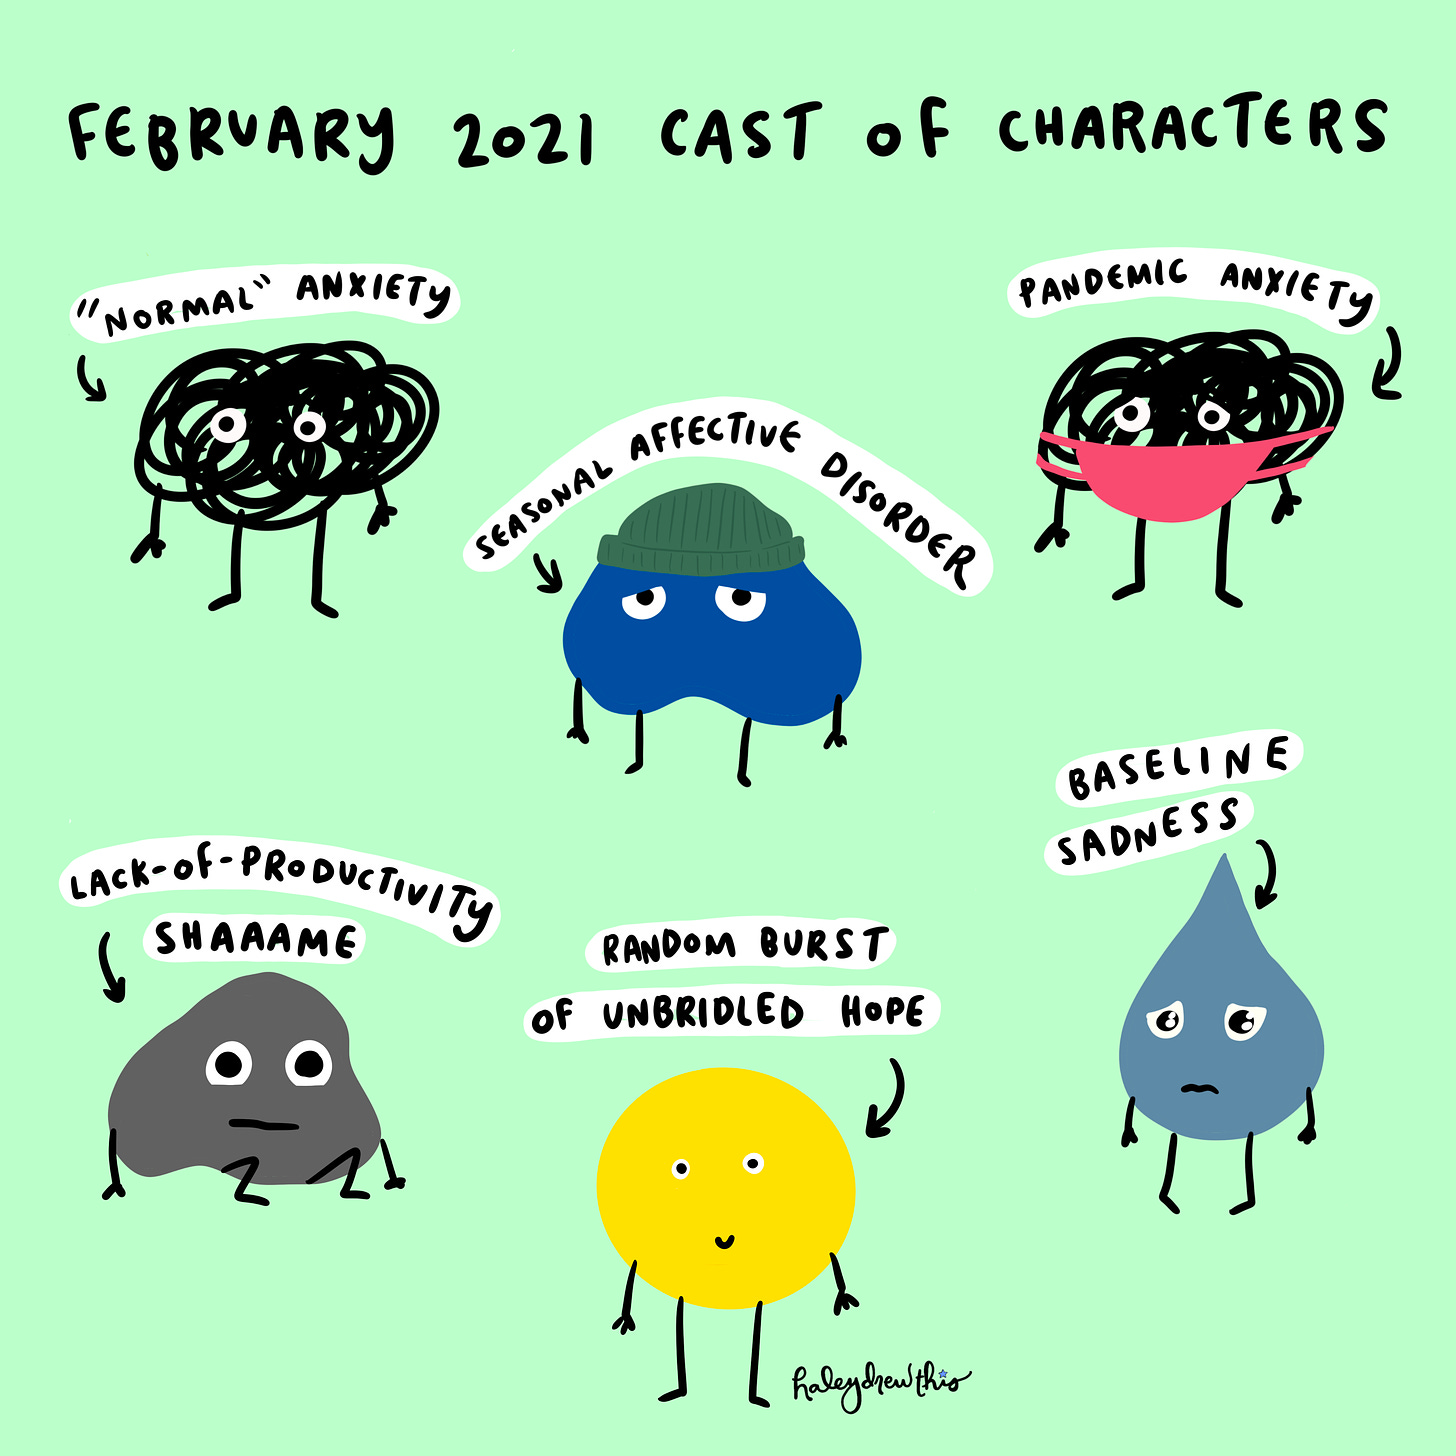 Title: February 2021 Cast of Characters. Illustration: little characters with the following titles: "Normal" Anxiety, Pandemic Anxiety, Seasonal Affective Disorder, Lack-of-Productivity Shame, Random Burst of Unbridled Hope, and Baseline Sadness